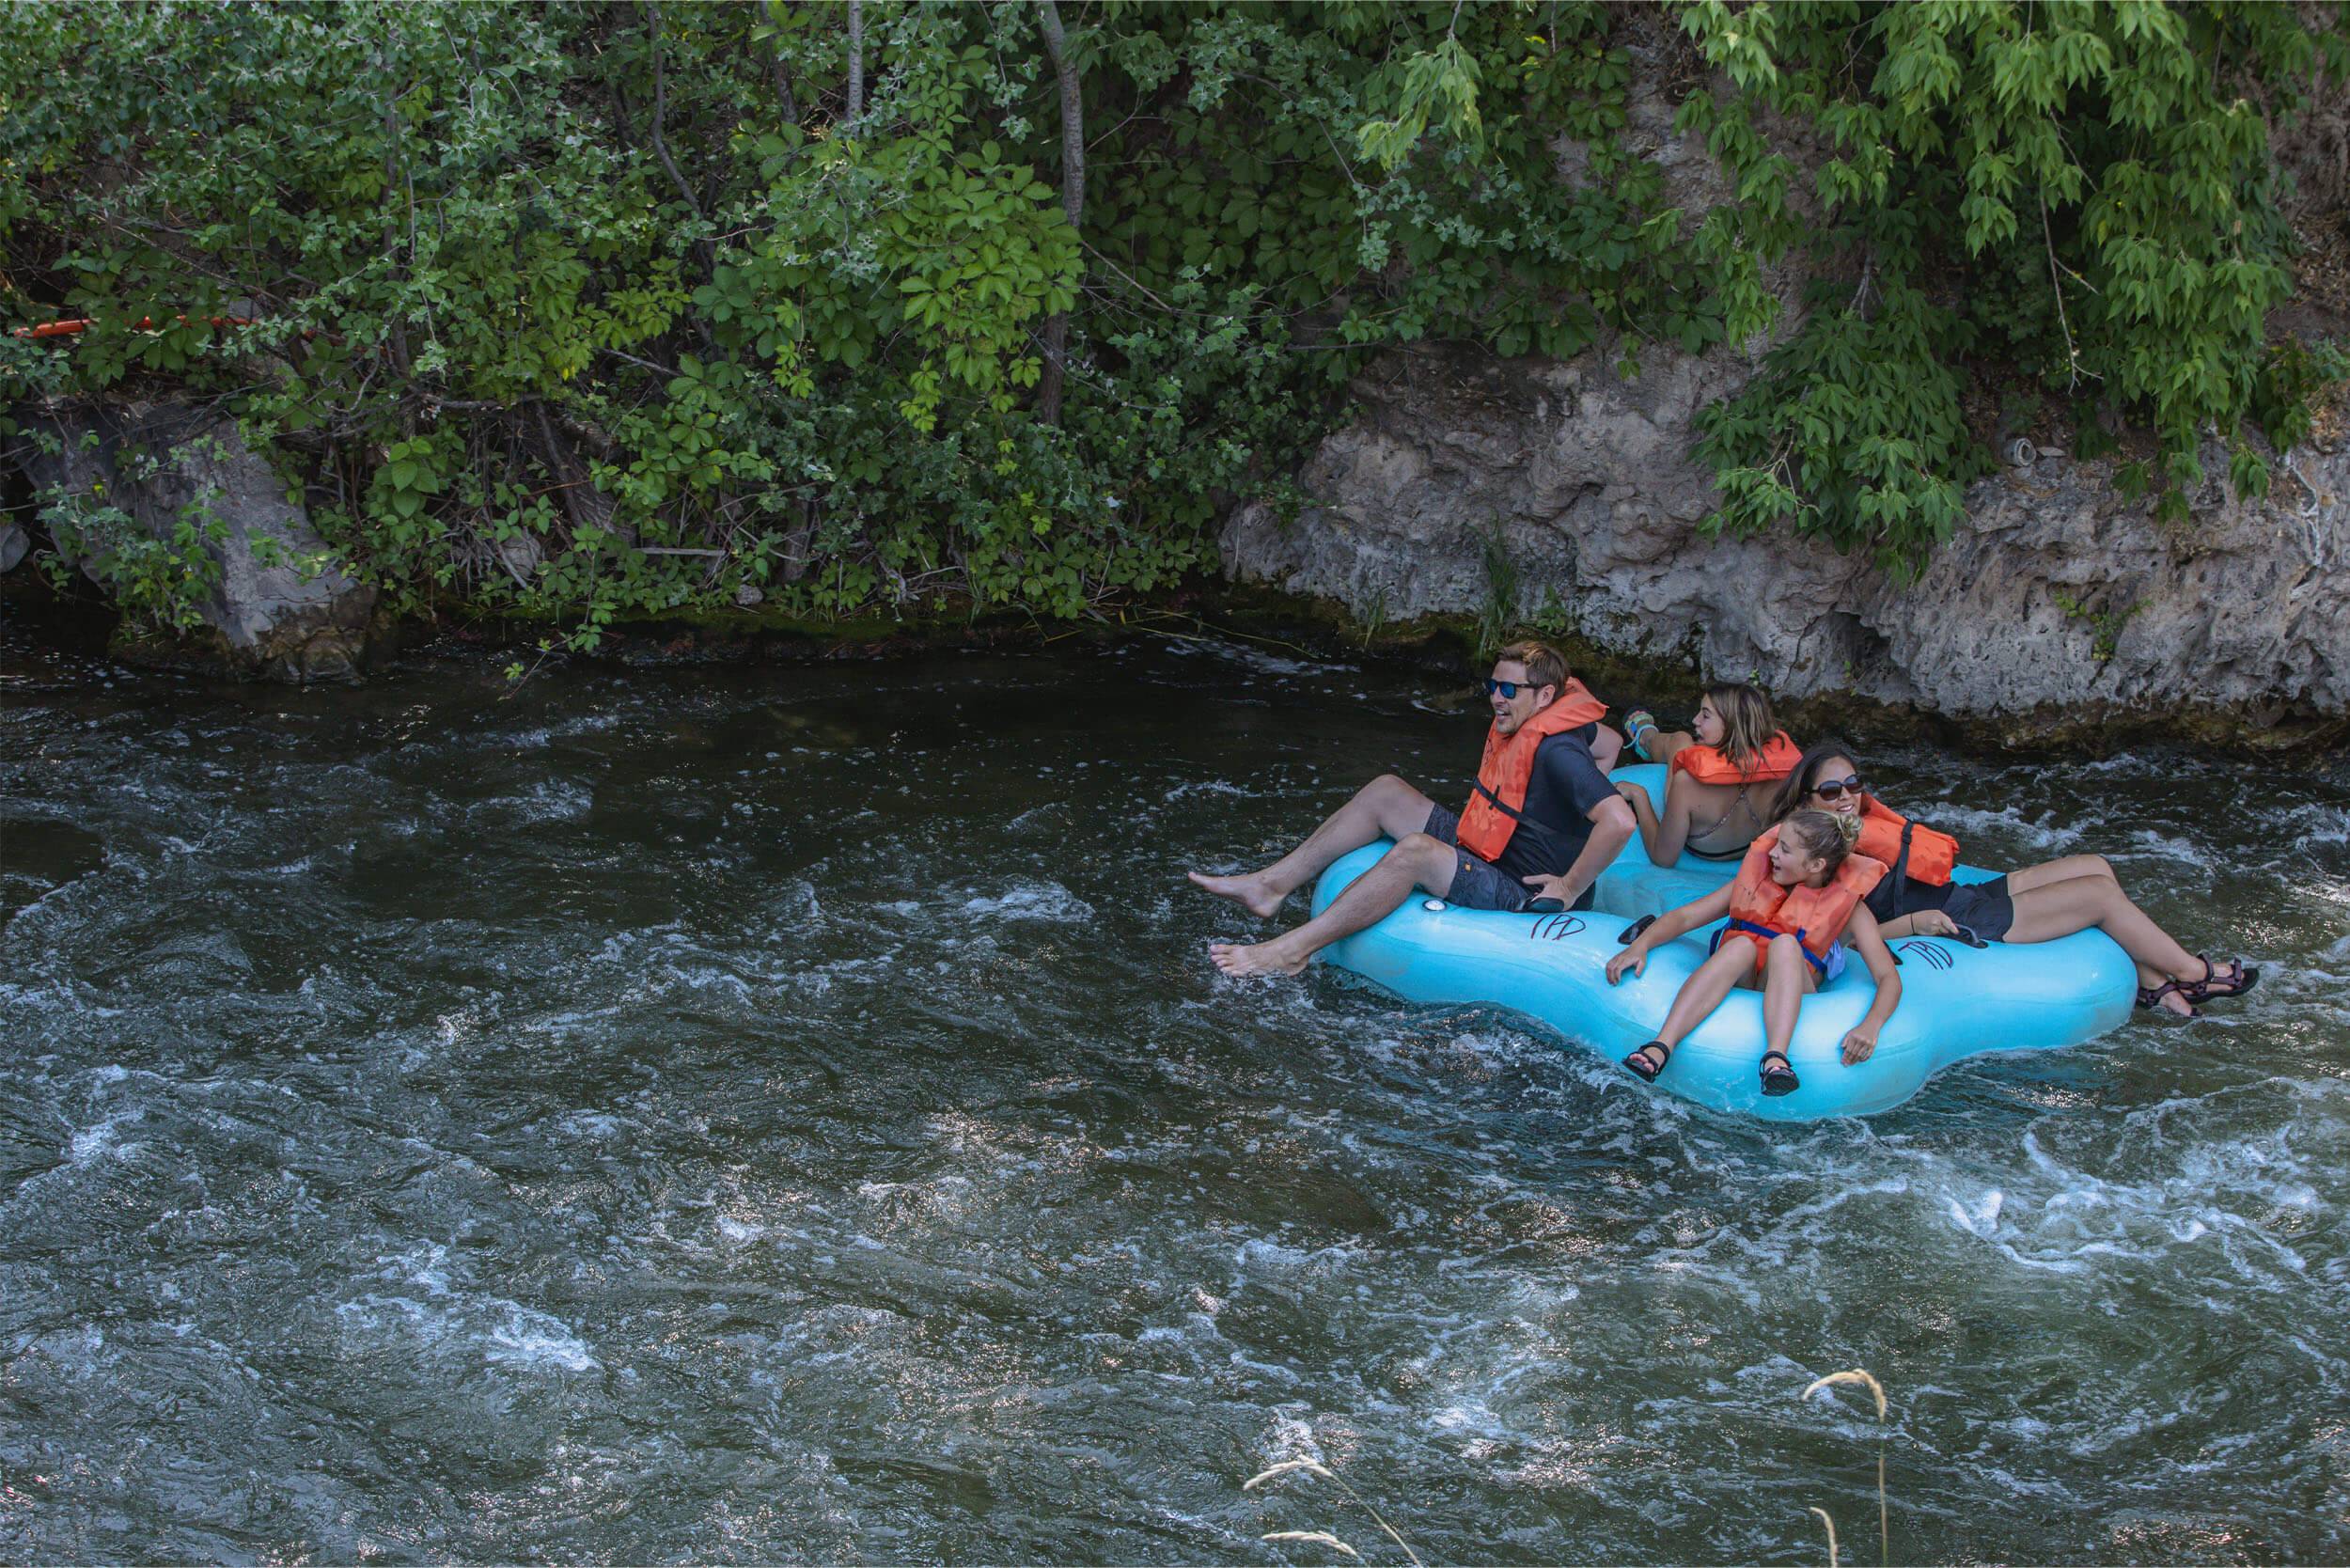 A family of four ride a raft down the Portneuf River